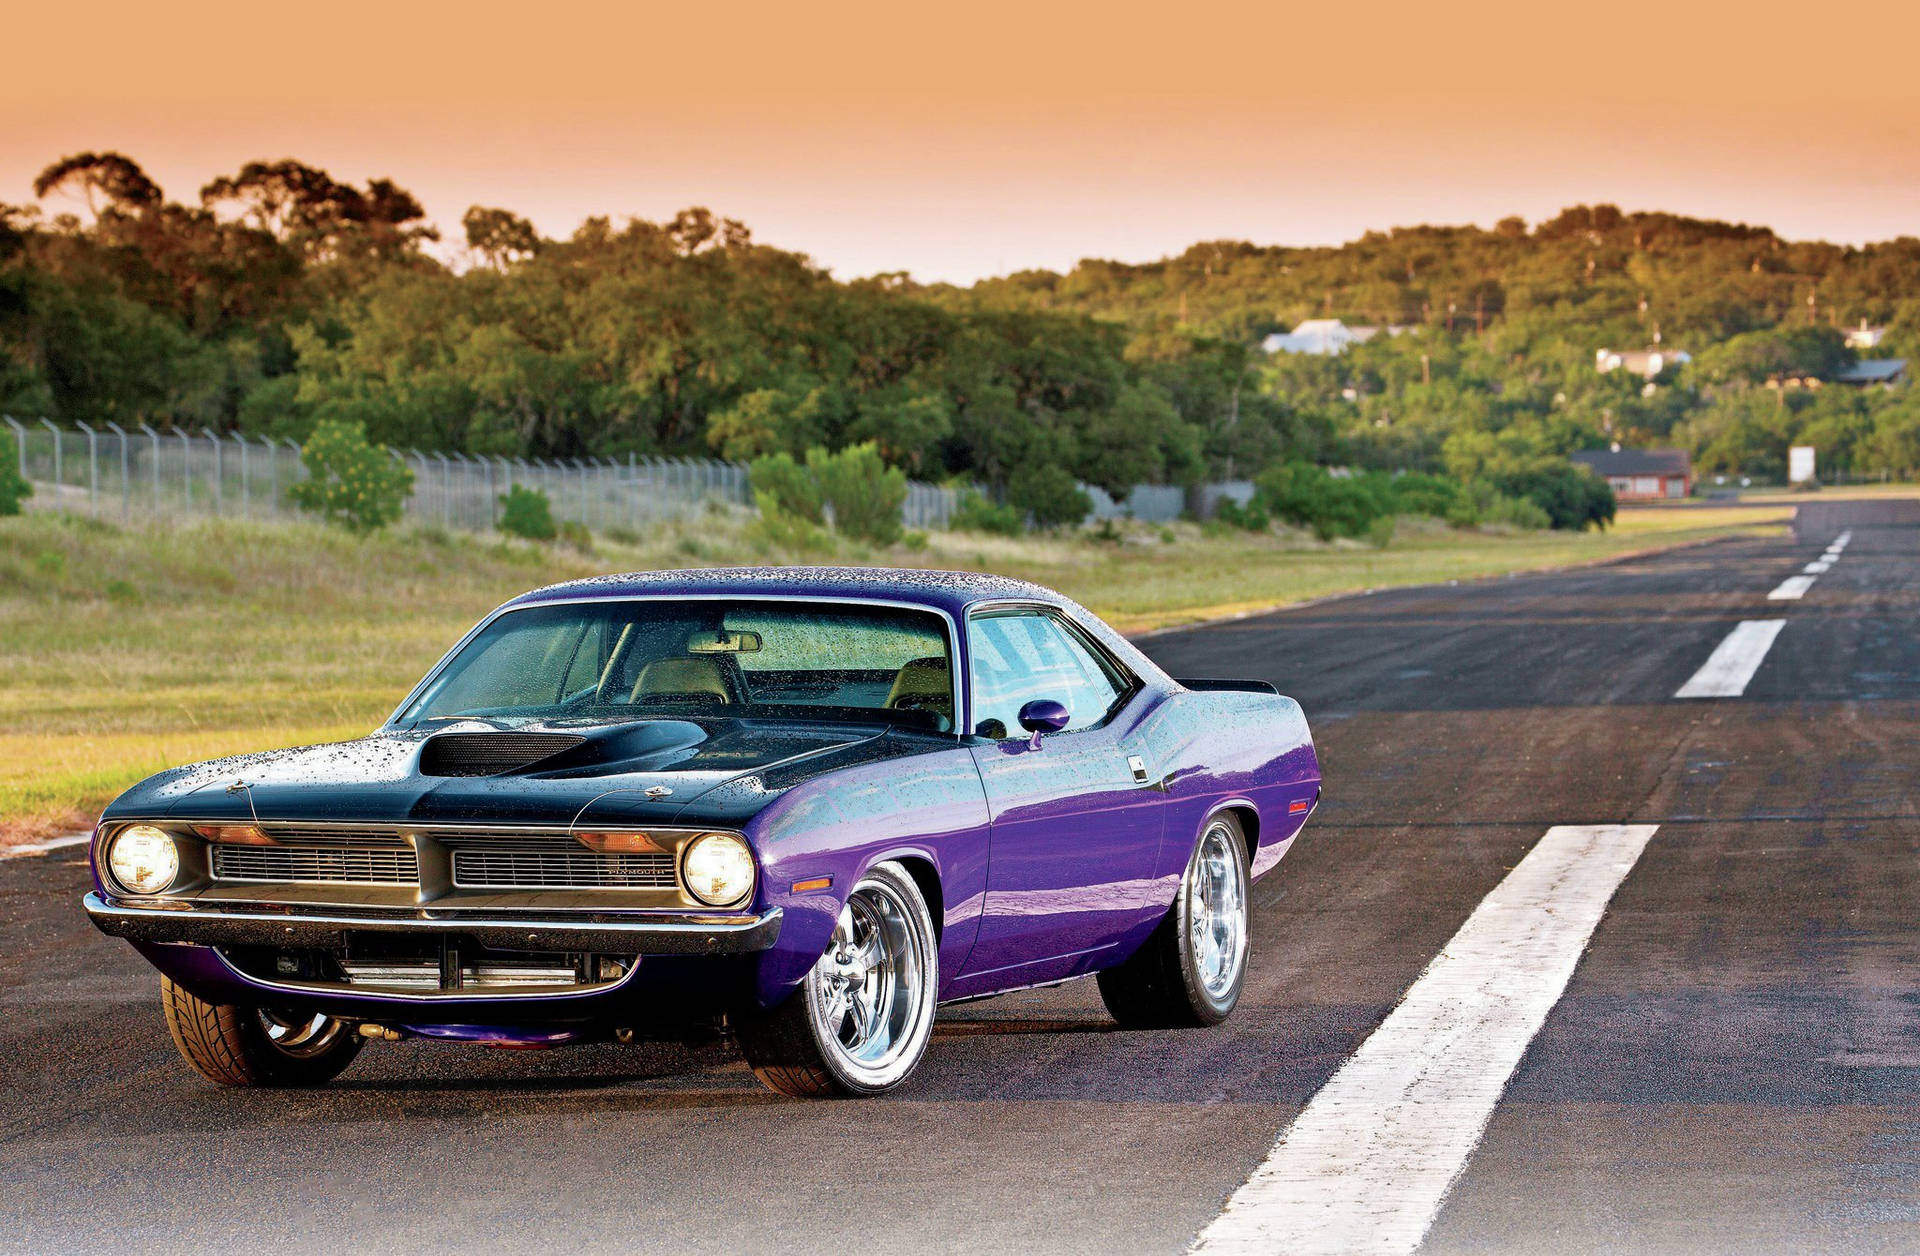 Violet Plymouth Barracuda On The Road Wallpaper